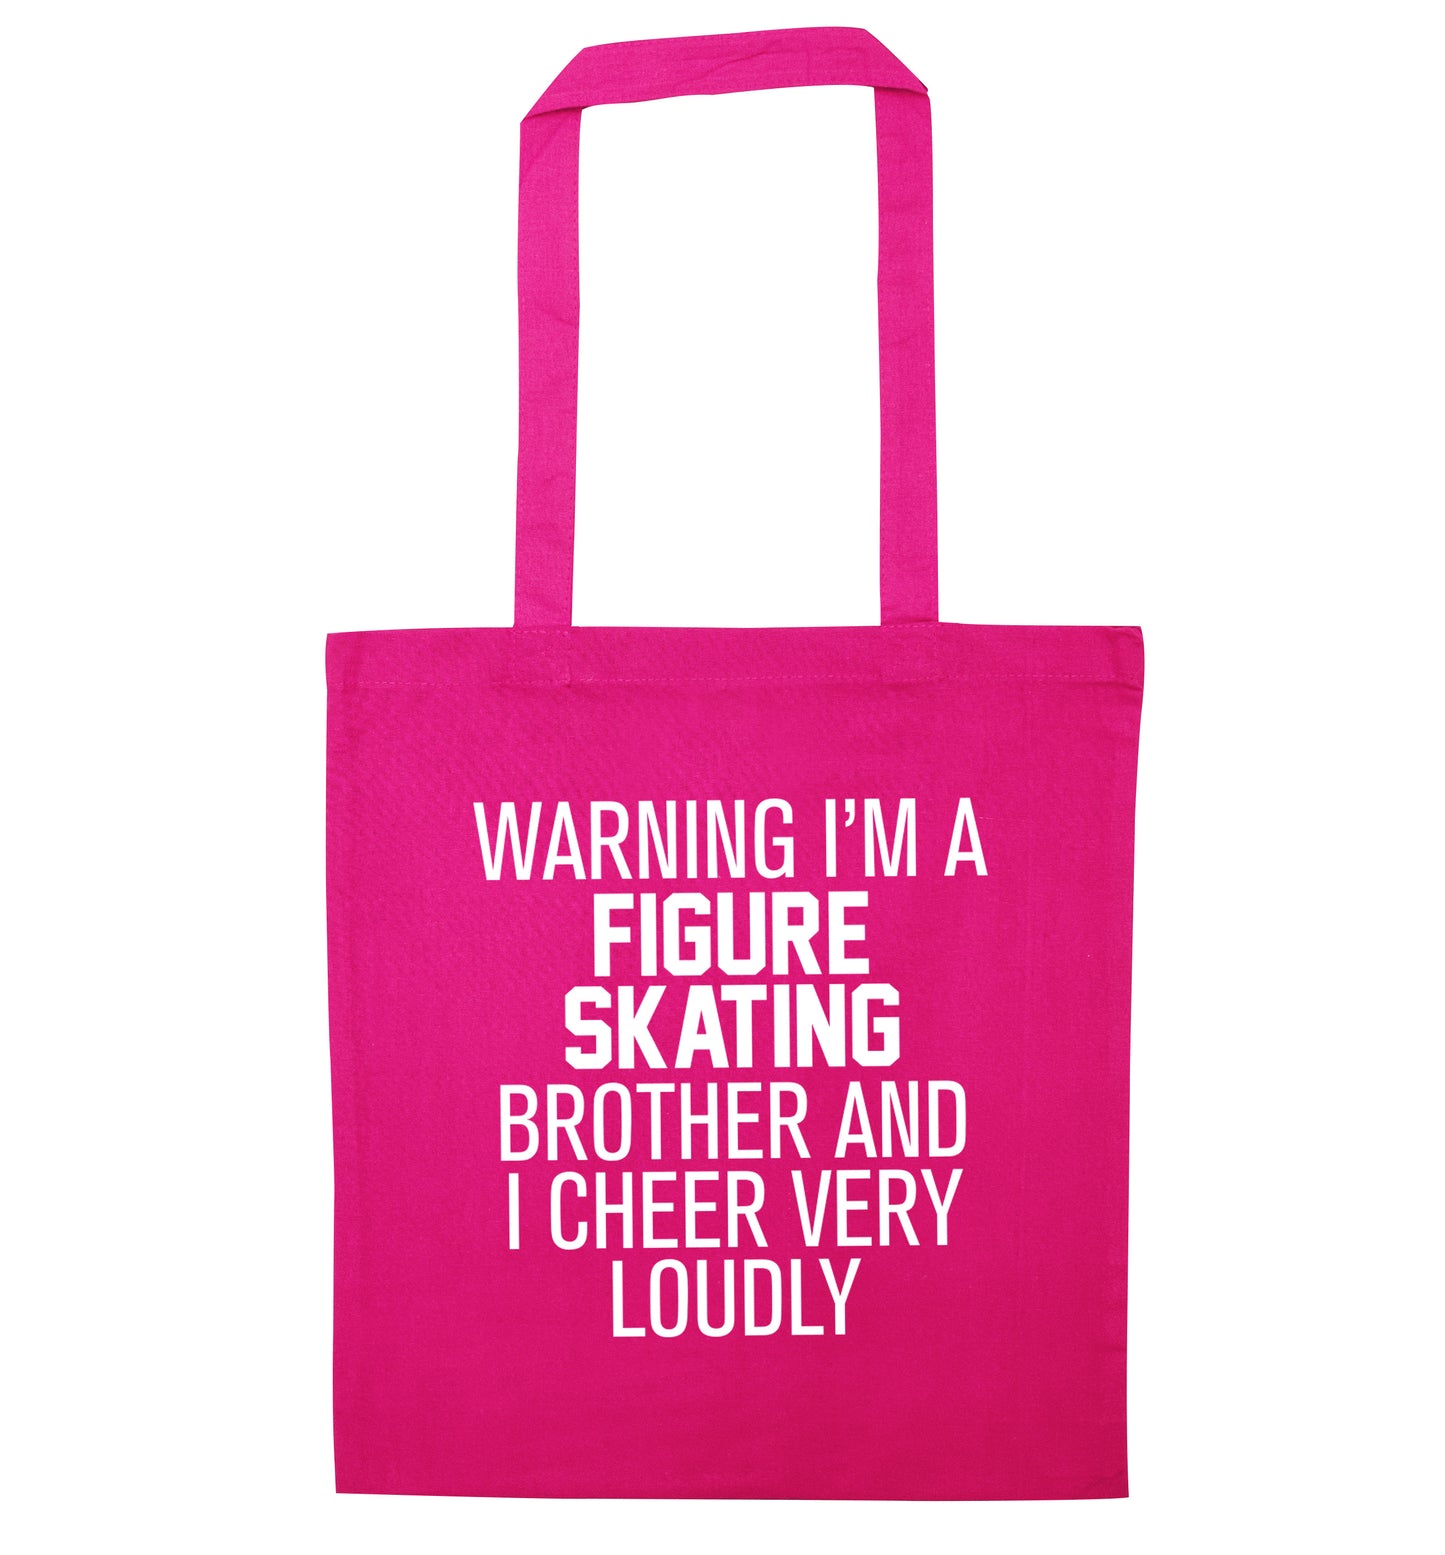 Warning I'm a figure skating brother and I cheer very loudly pink tote bag